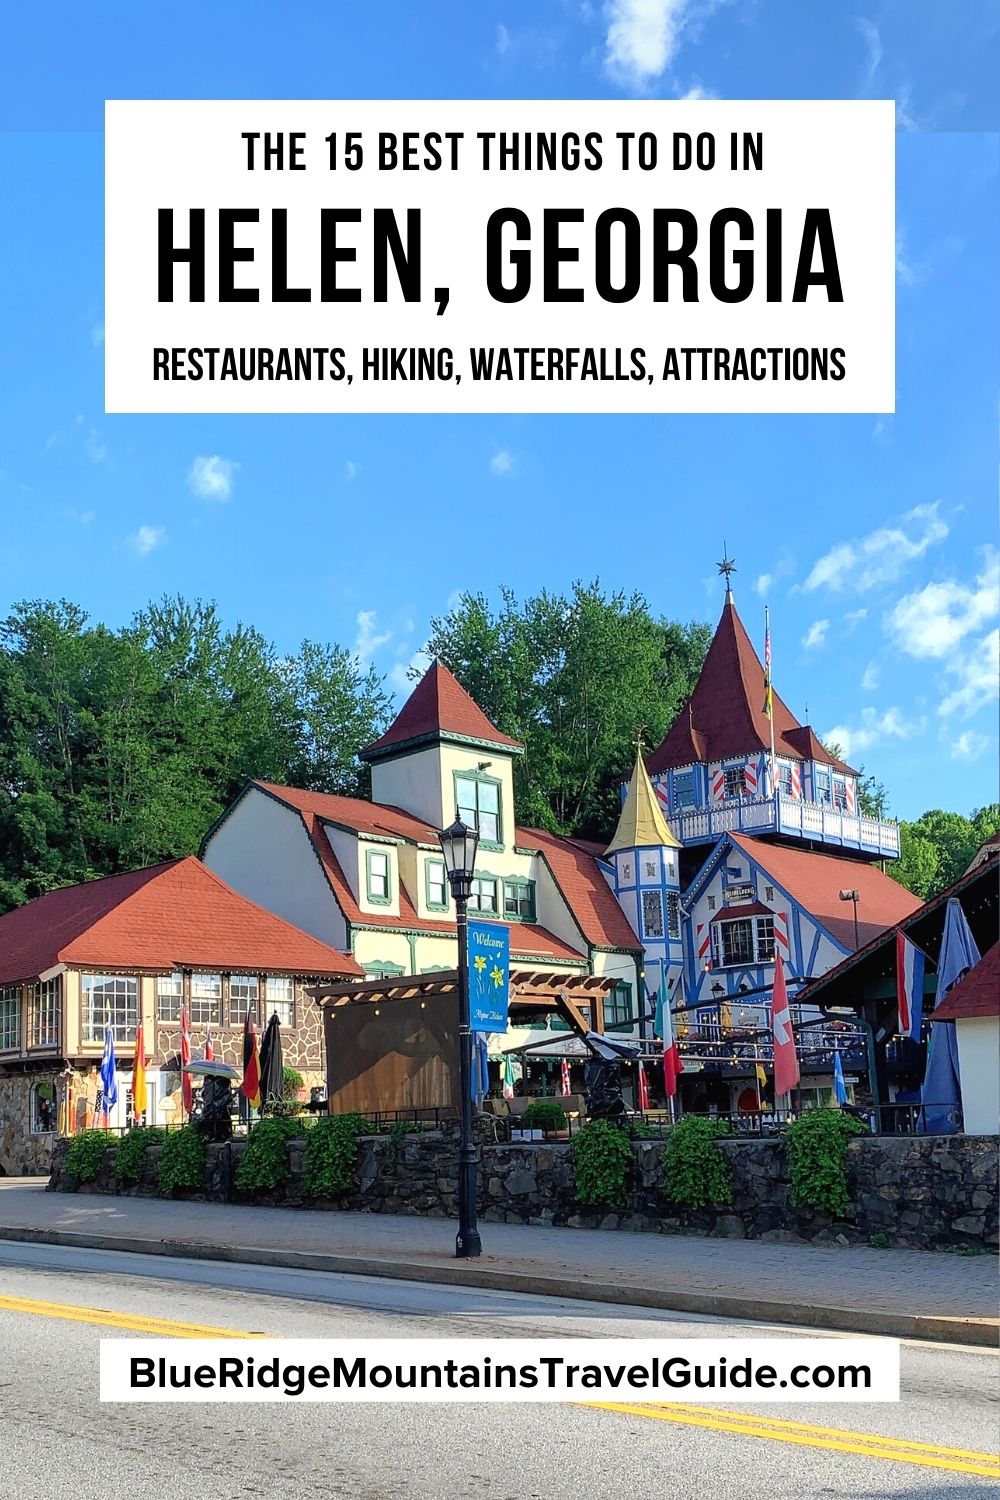 The 15 Best Things to Do in Helen GA including all the best Helen restaurants, hiking trails, waterfalls, and other popular tourist attractions | helen ga things to do | helen ga attractions | things to do near helen ga | helen ga activities | things to do around helen ga | things to do in helen georgia | helen georgia things to do | helen ga downtown | what to do in helen georgia | what to do in helen ga | helen ga attractions | attractions helen georgia